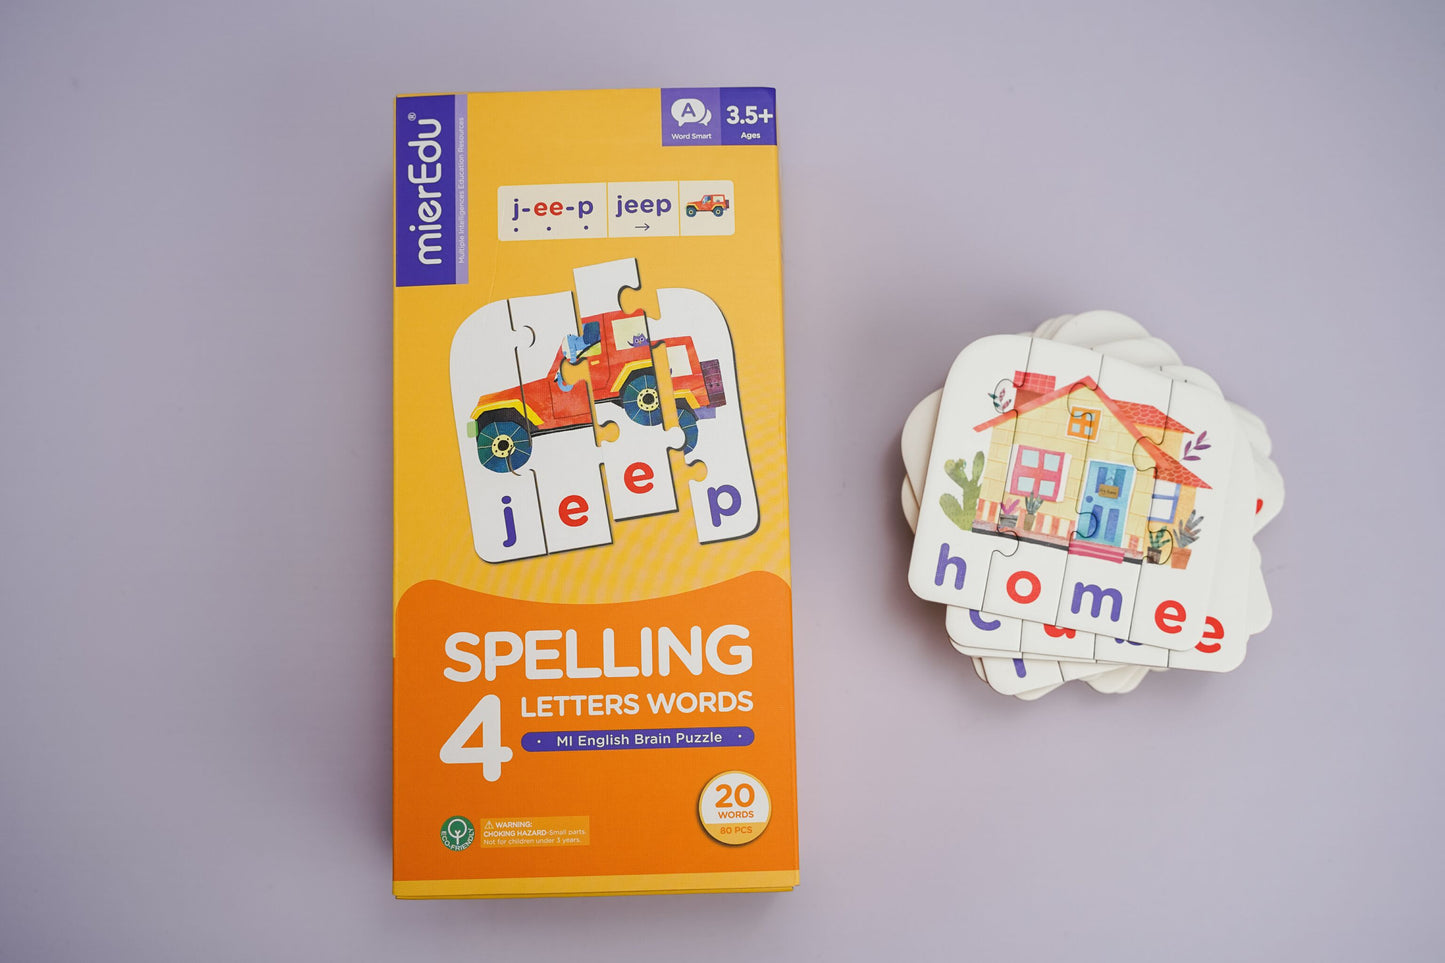 Spelling 4 Letters Words Puzzle